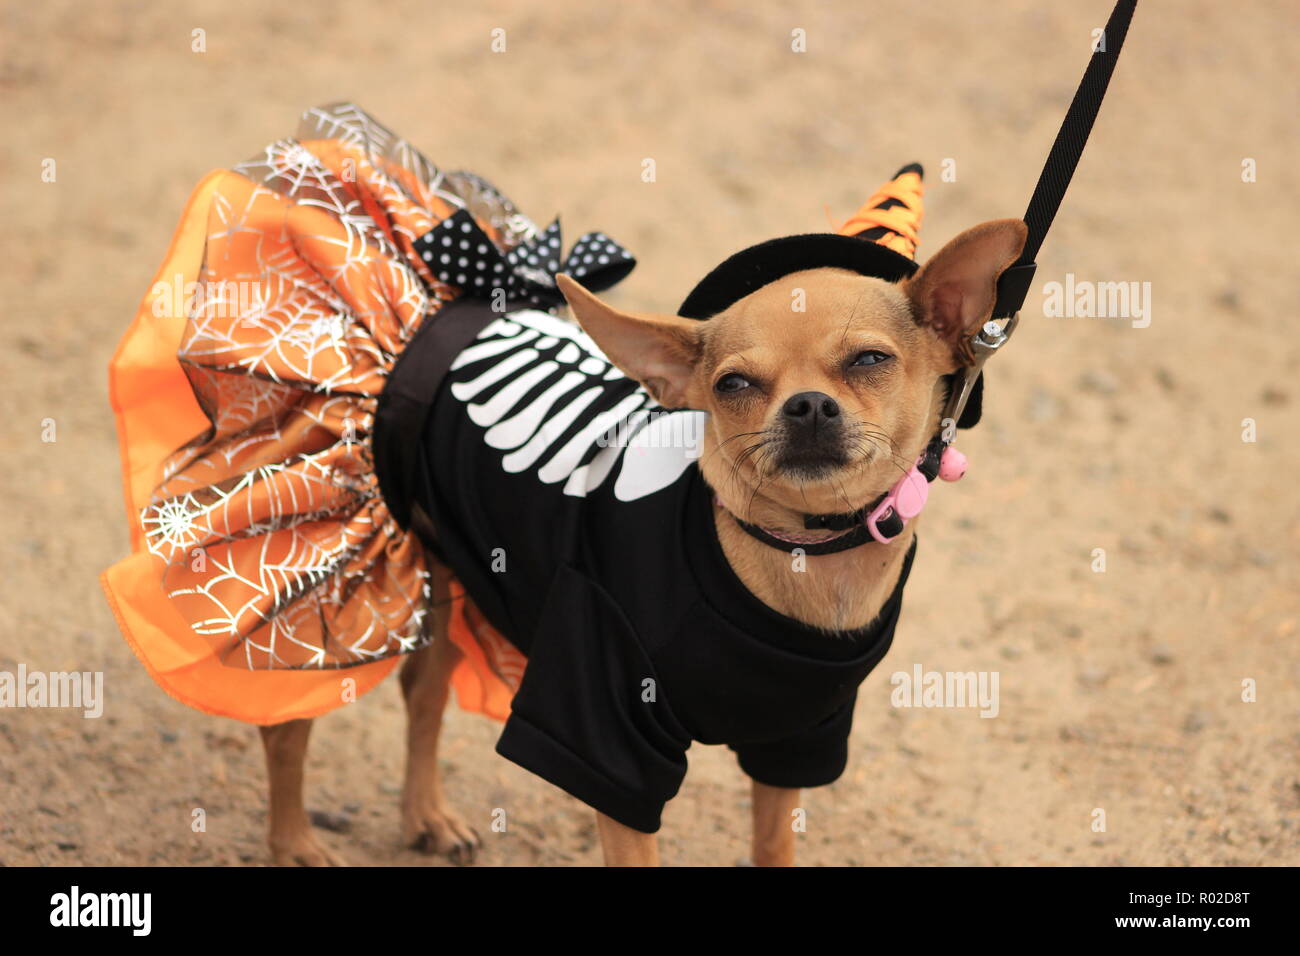 A cute Chihuahua dog wearing a witch costume for Halloween looks unhappy about being dressed up Stock Photo